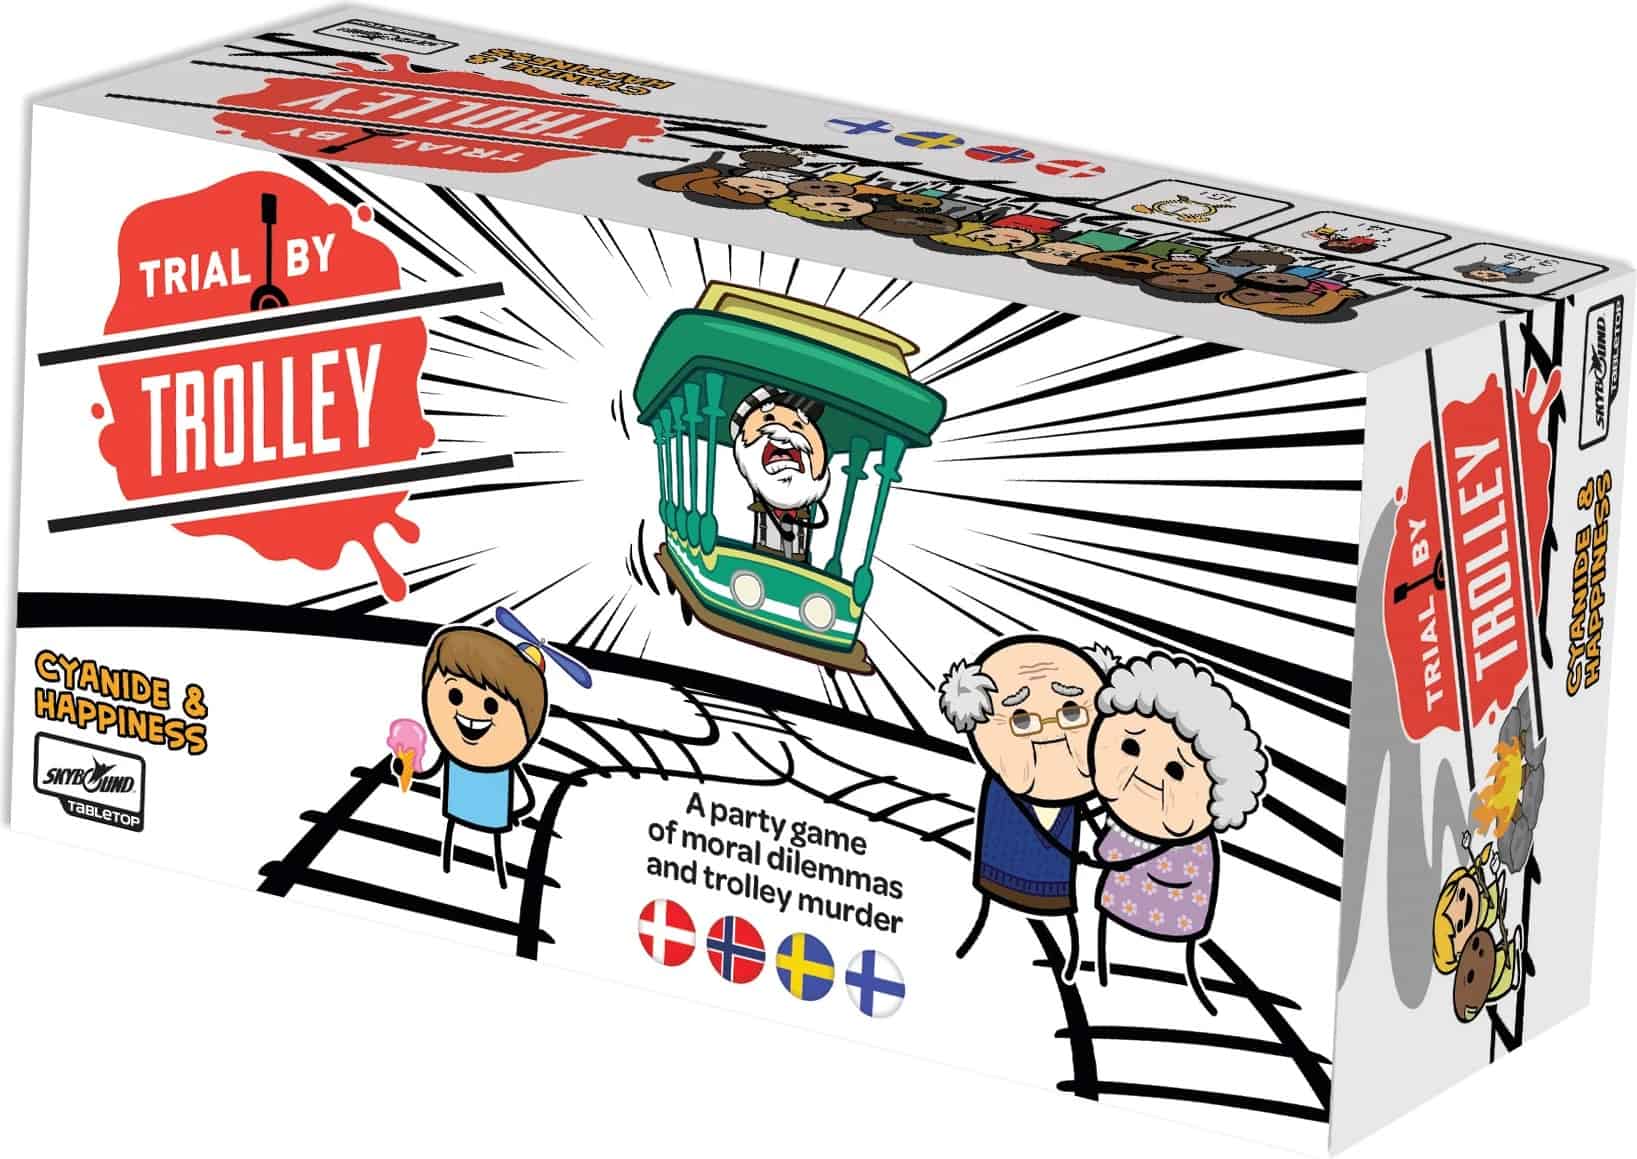 TRIAL BY TROLLEY | Impulse Games and Hobbies